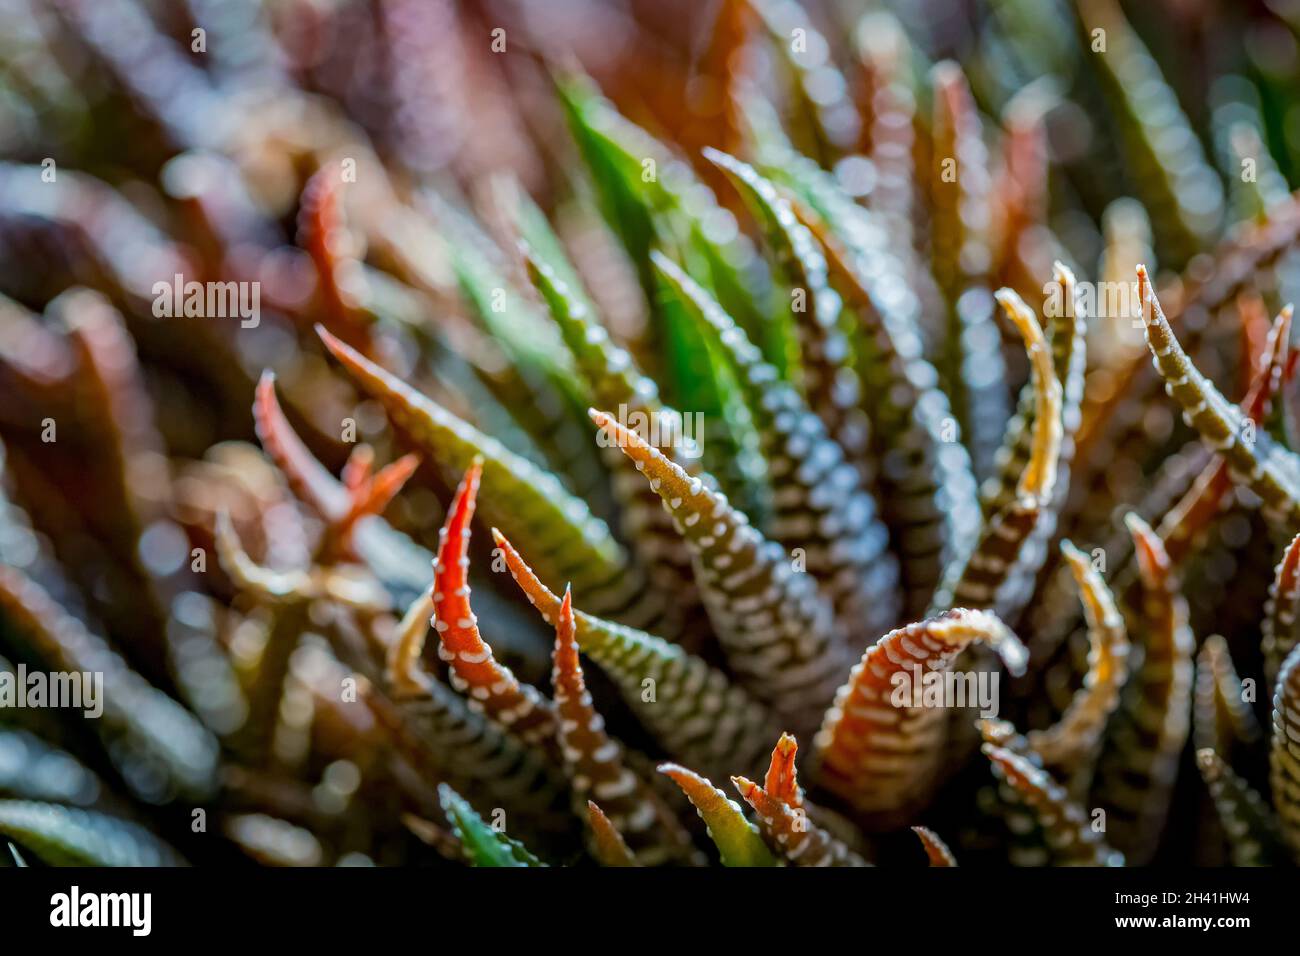 Close-up abstract background of Haworthiopsis fasciata or Haworthia fasciata or Haworthia Zebra succulent. Selective focus. Stock Photo